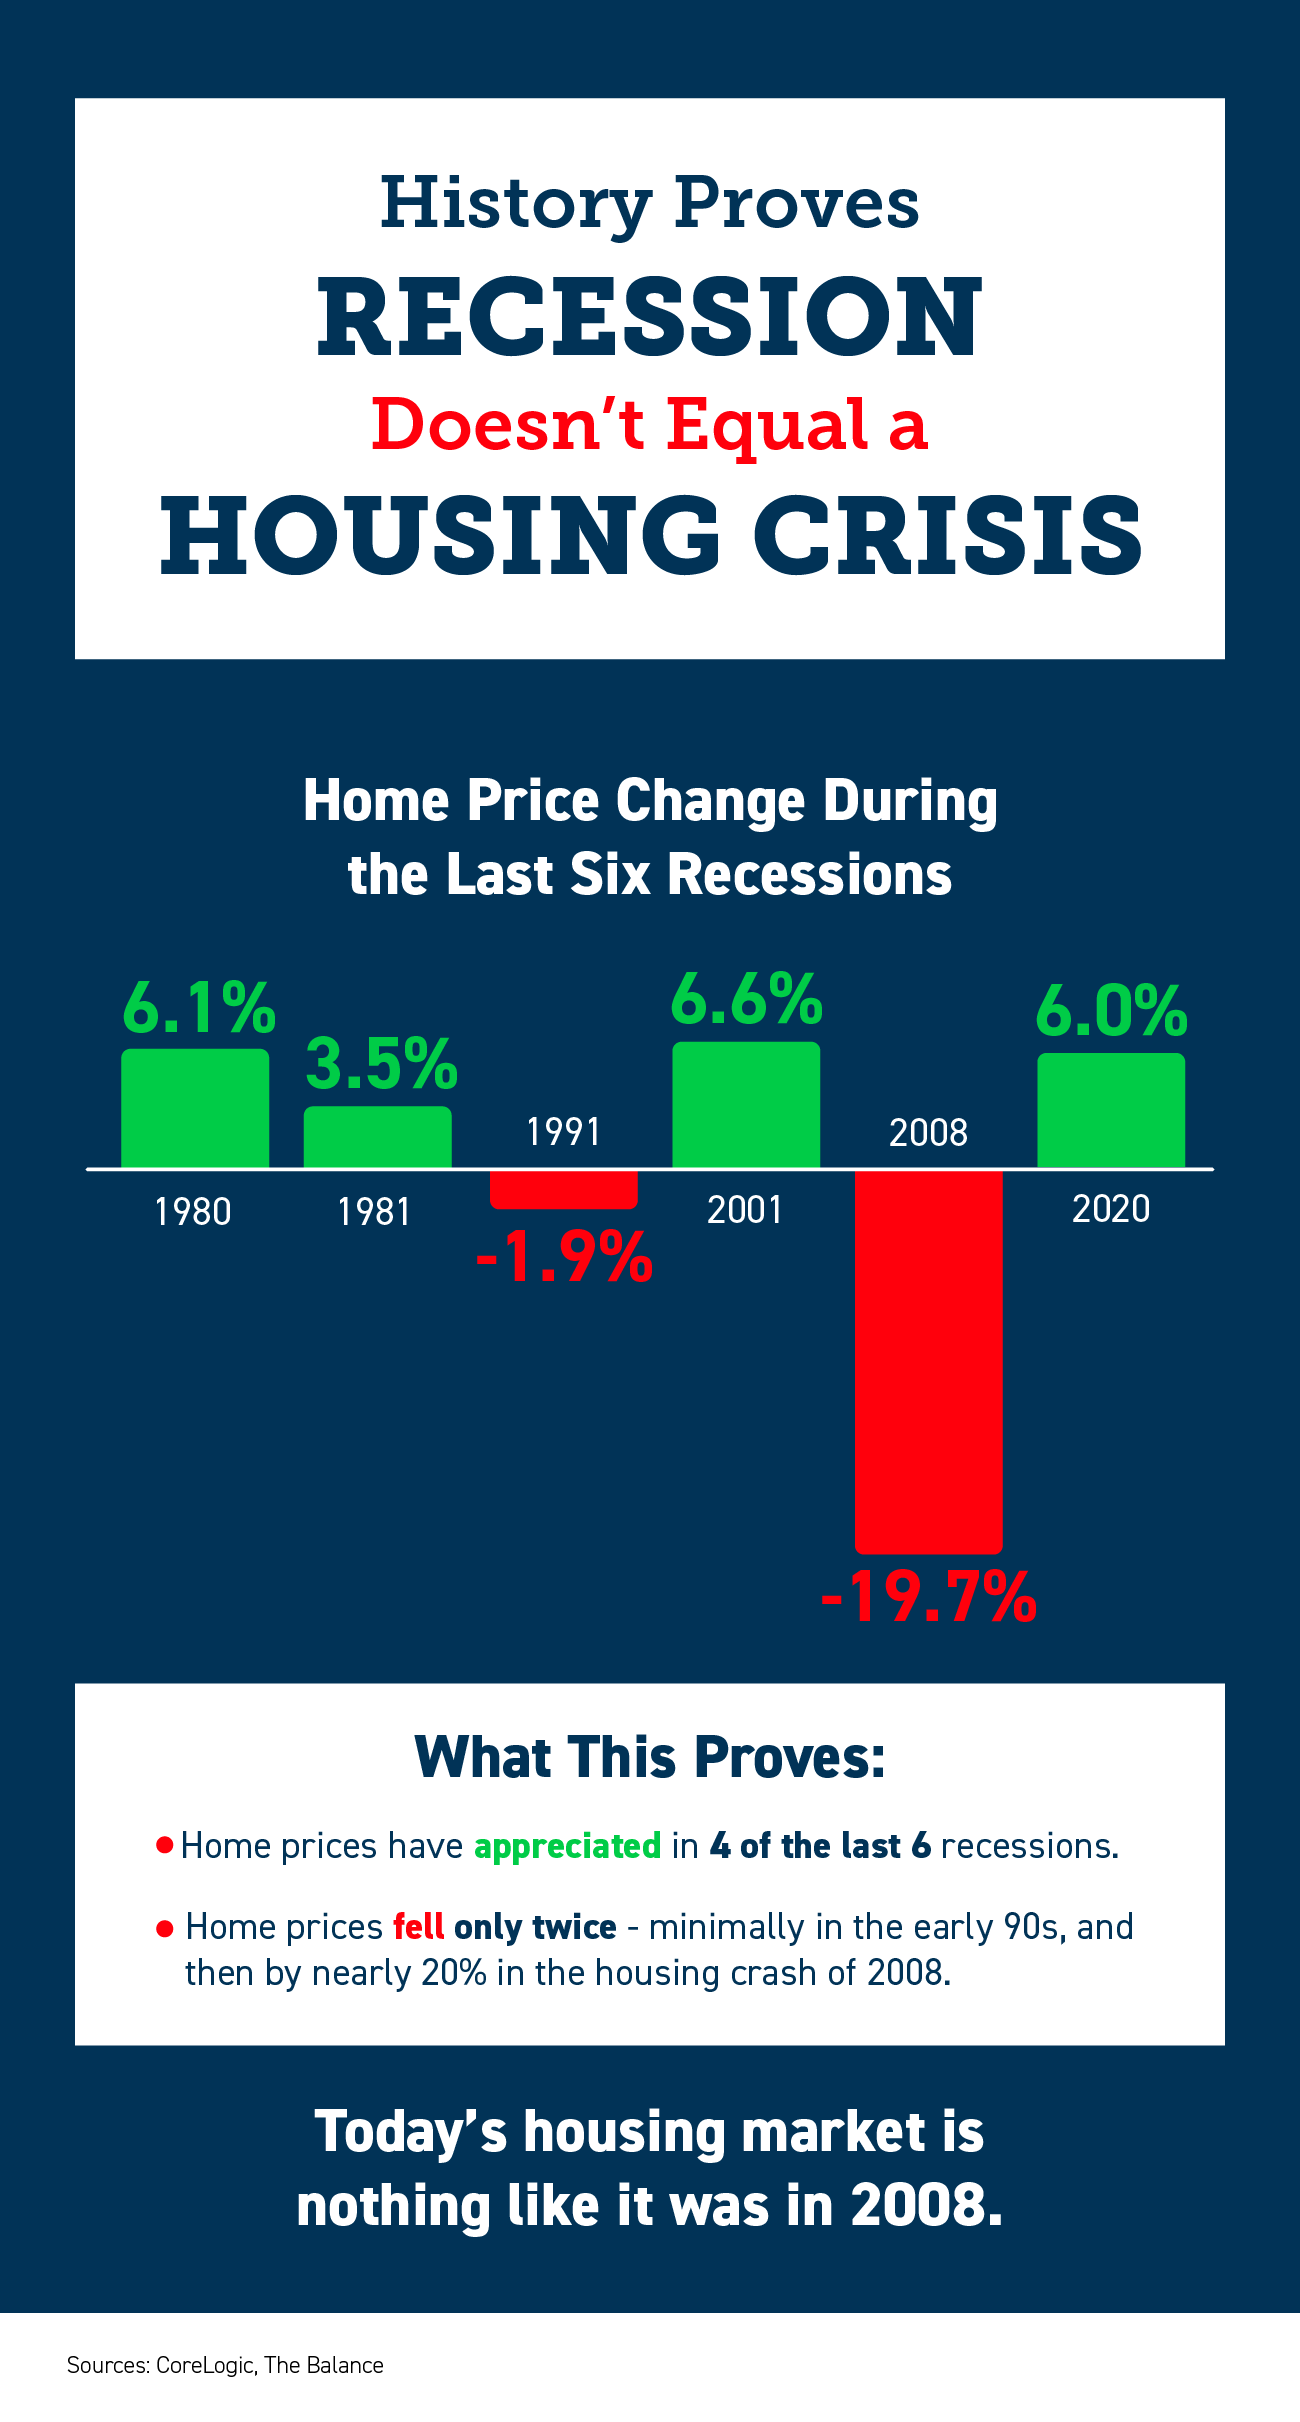 History Proves Recession Doesn’t Equal a Housing Crisis [INFOGRAPHIC